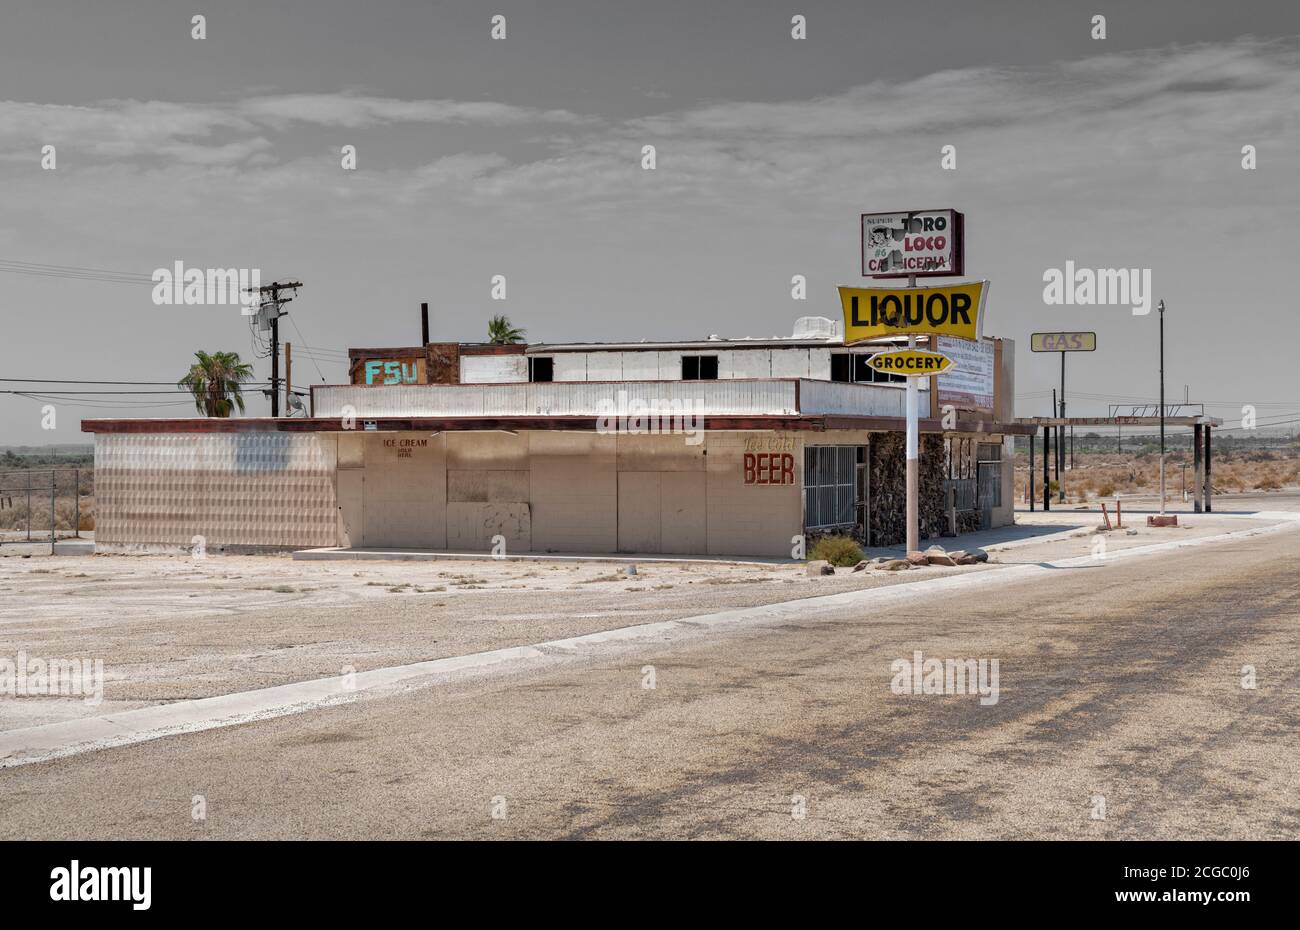 An abandoned store with vintage sign in Salton Sea, California, USA. Stock Photo